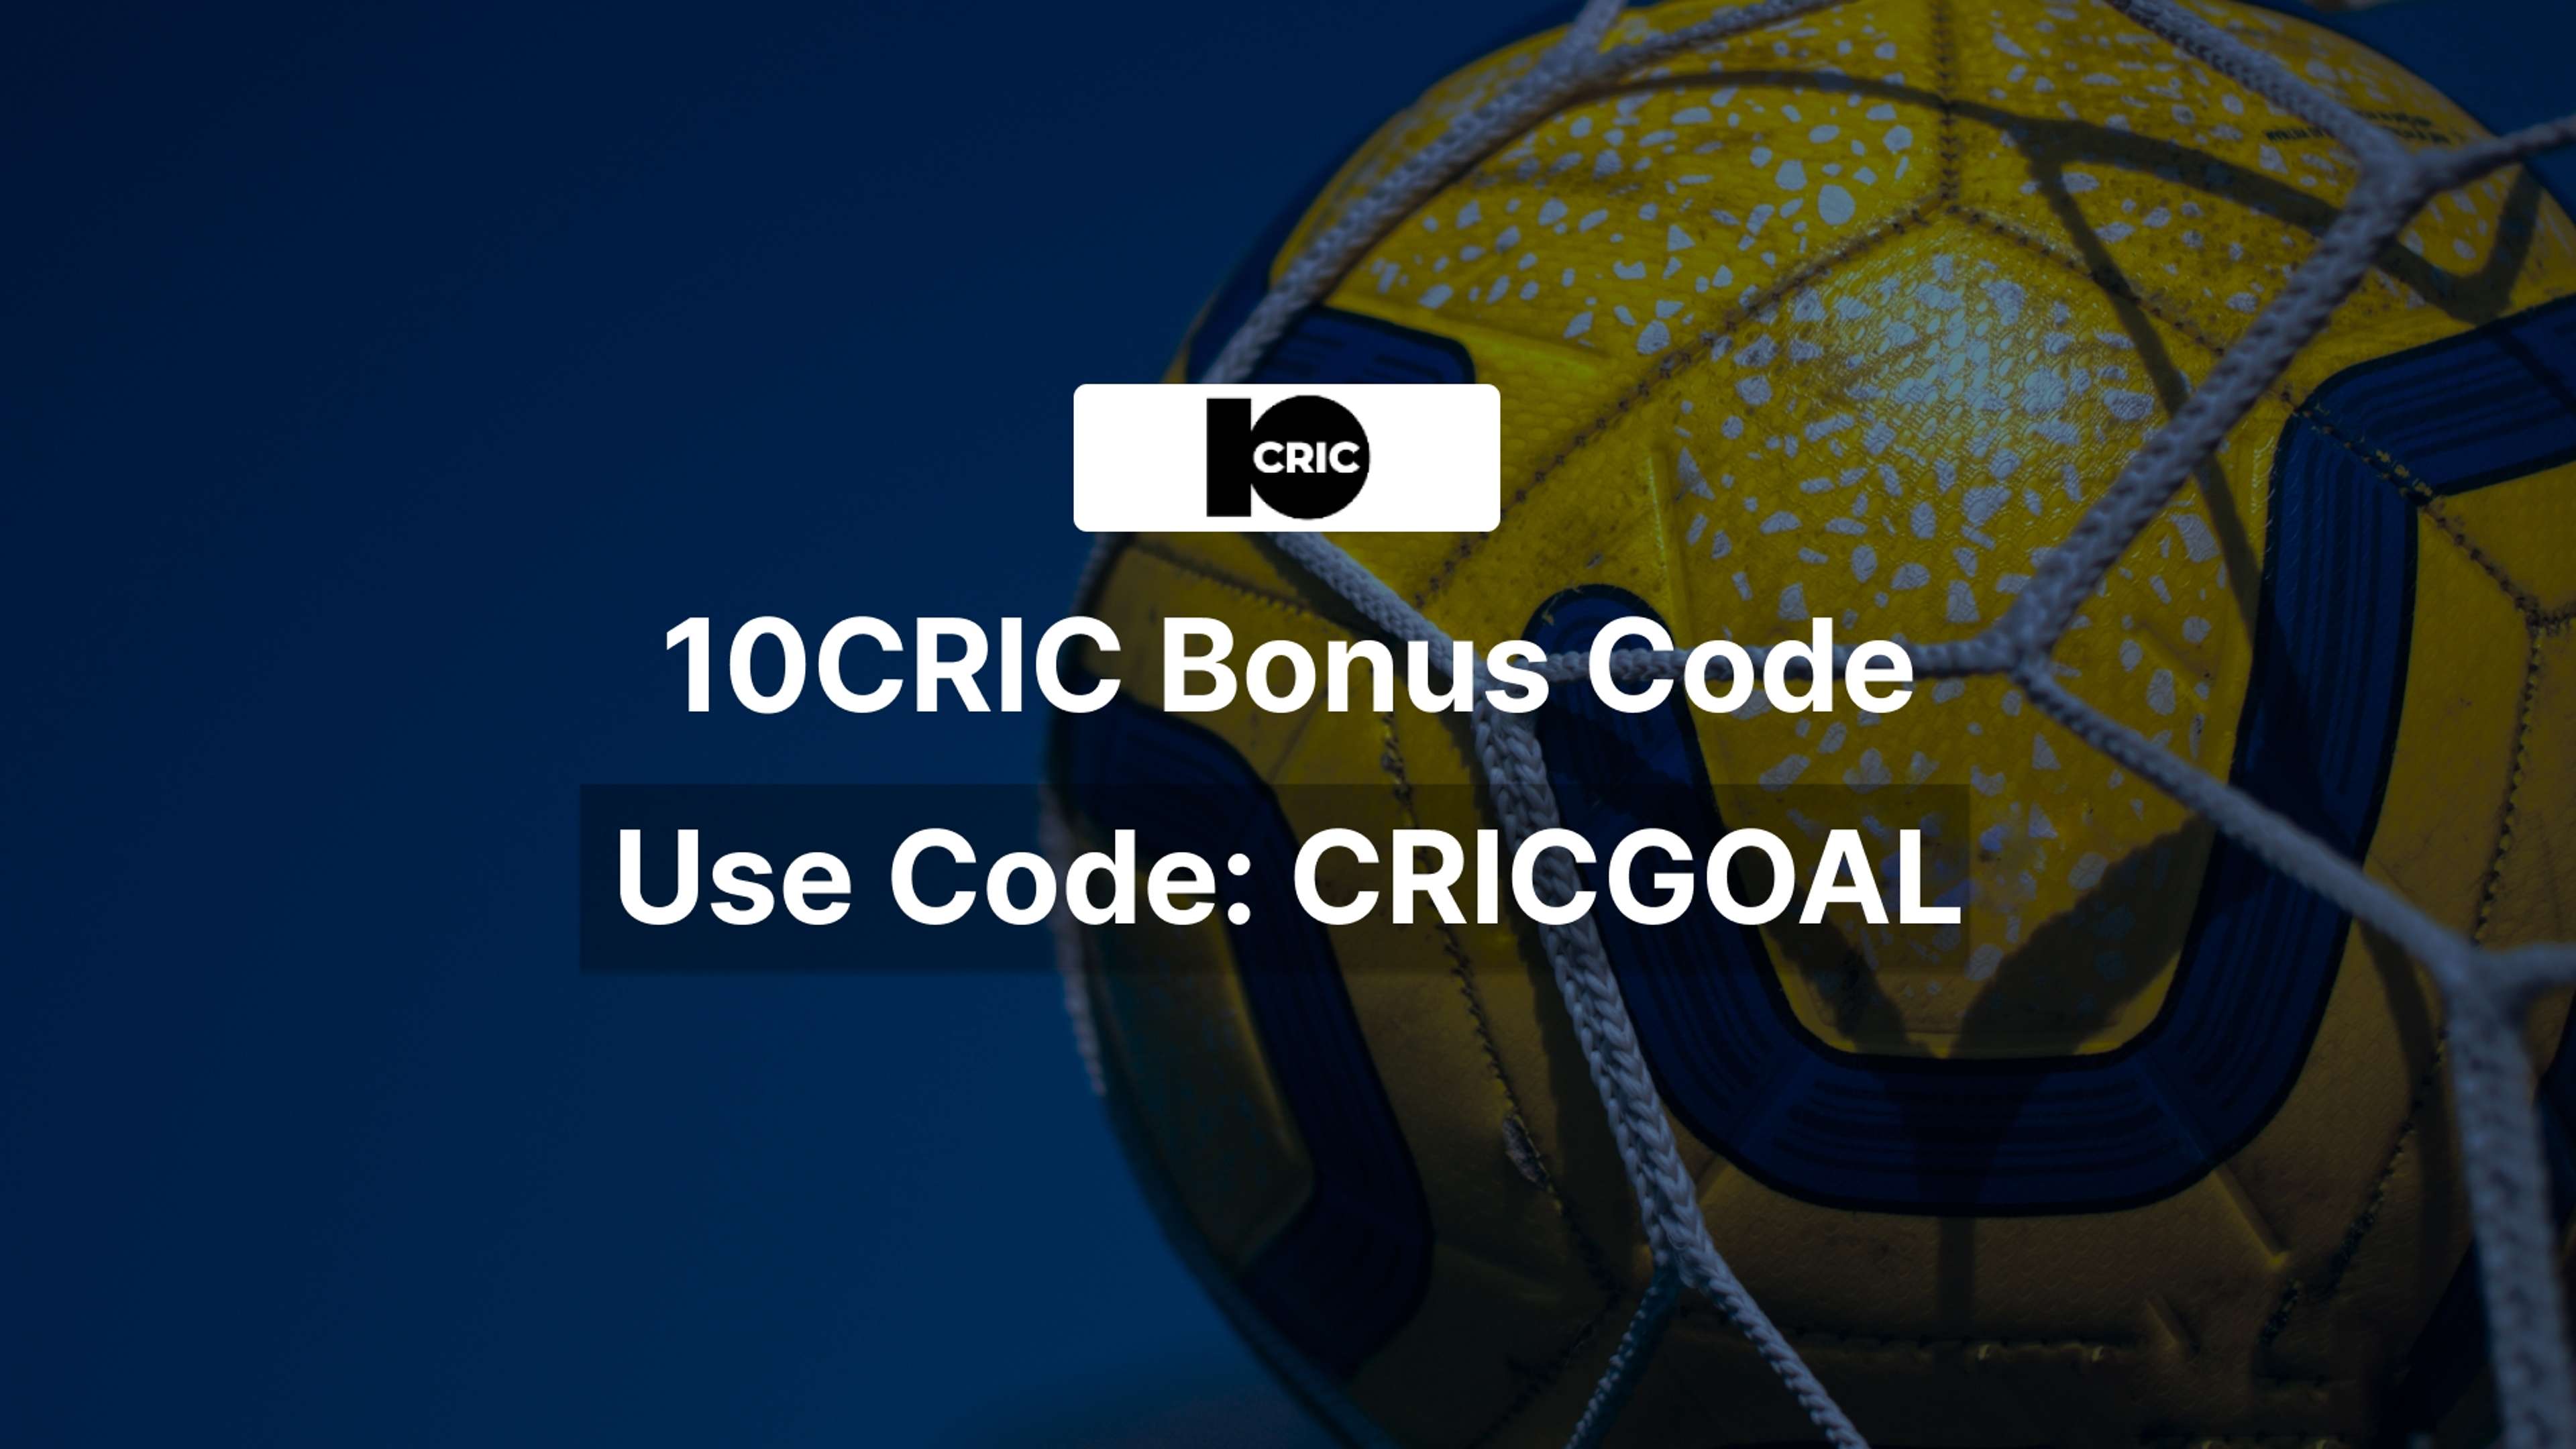 Image showing the 10CRIC bonus code for India